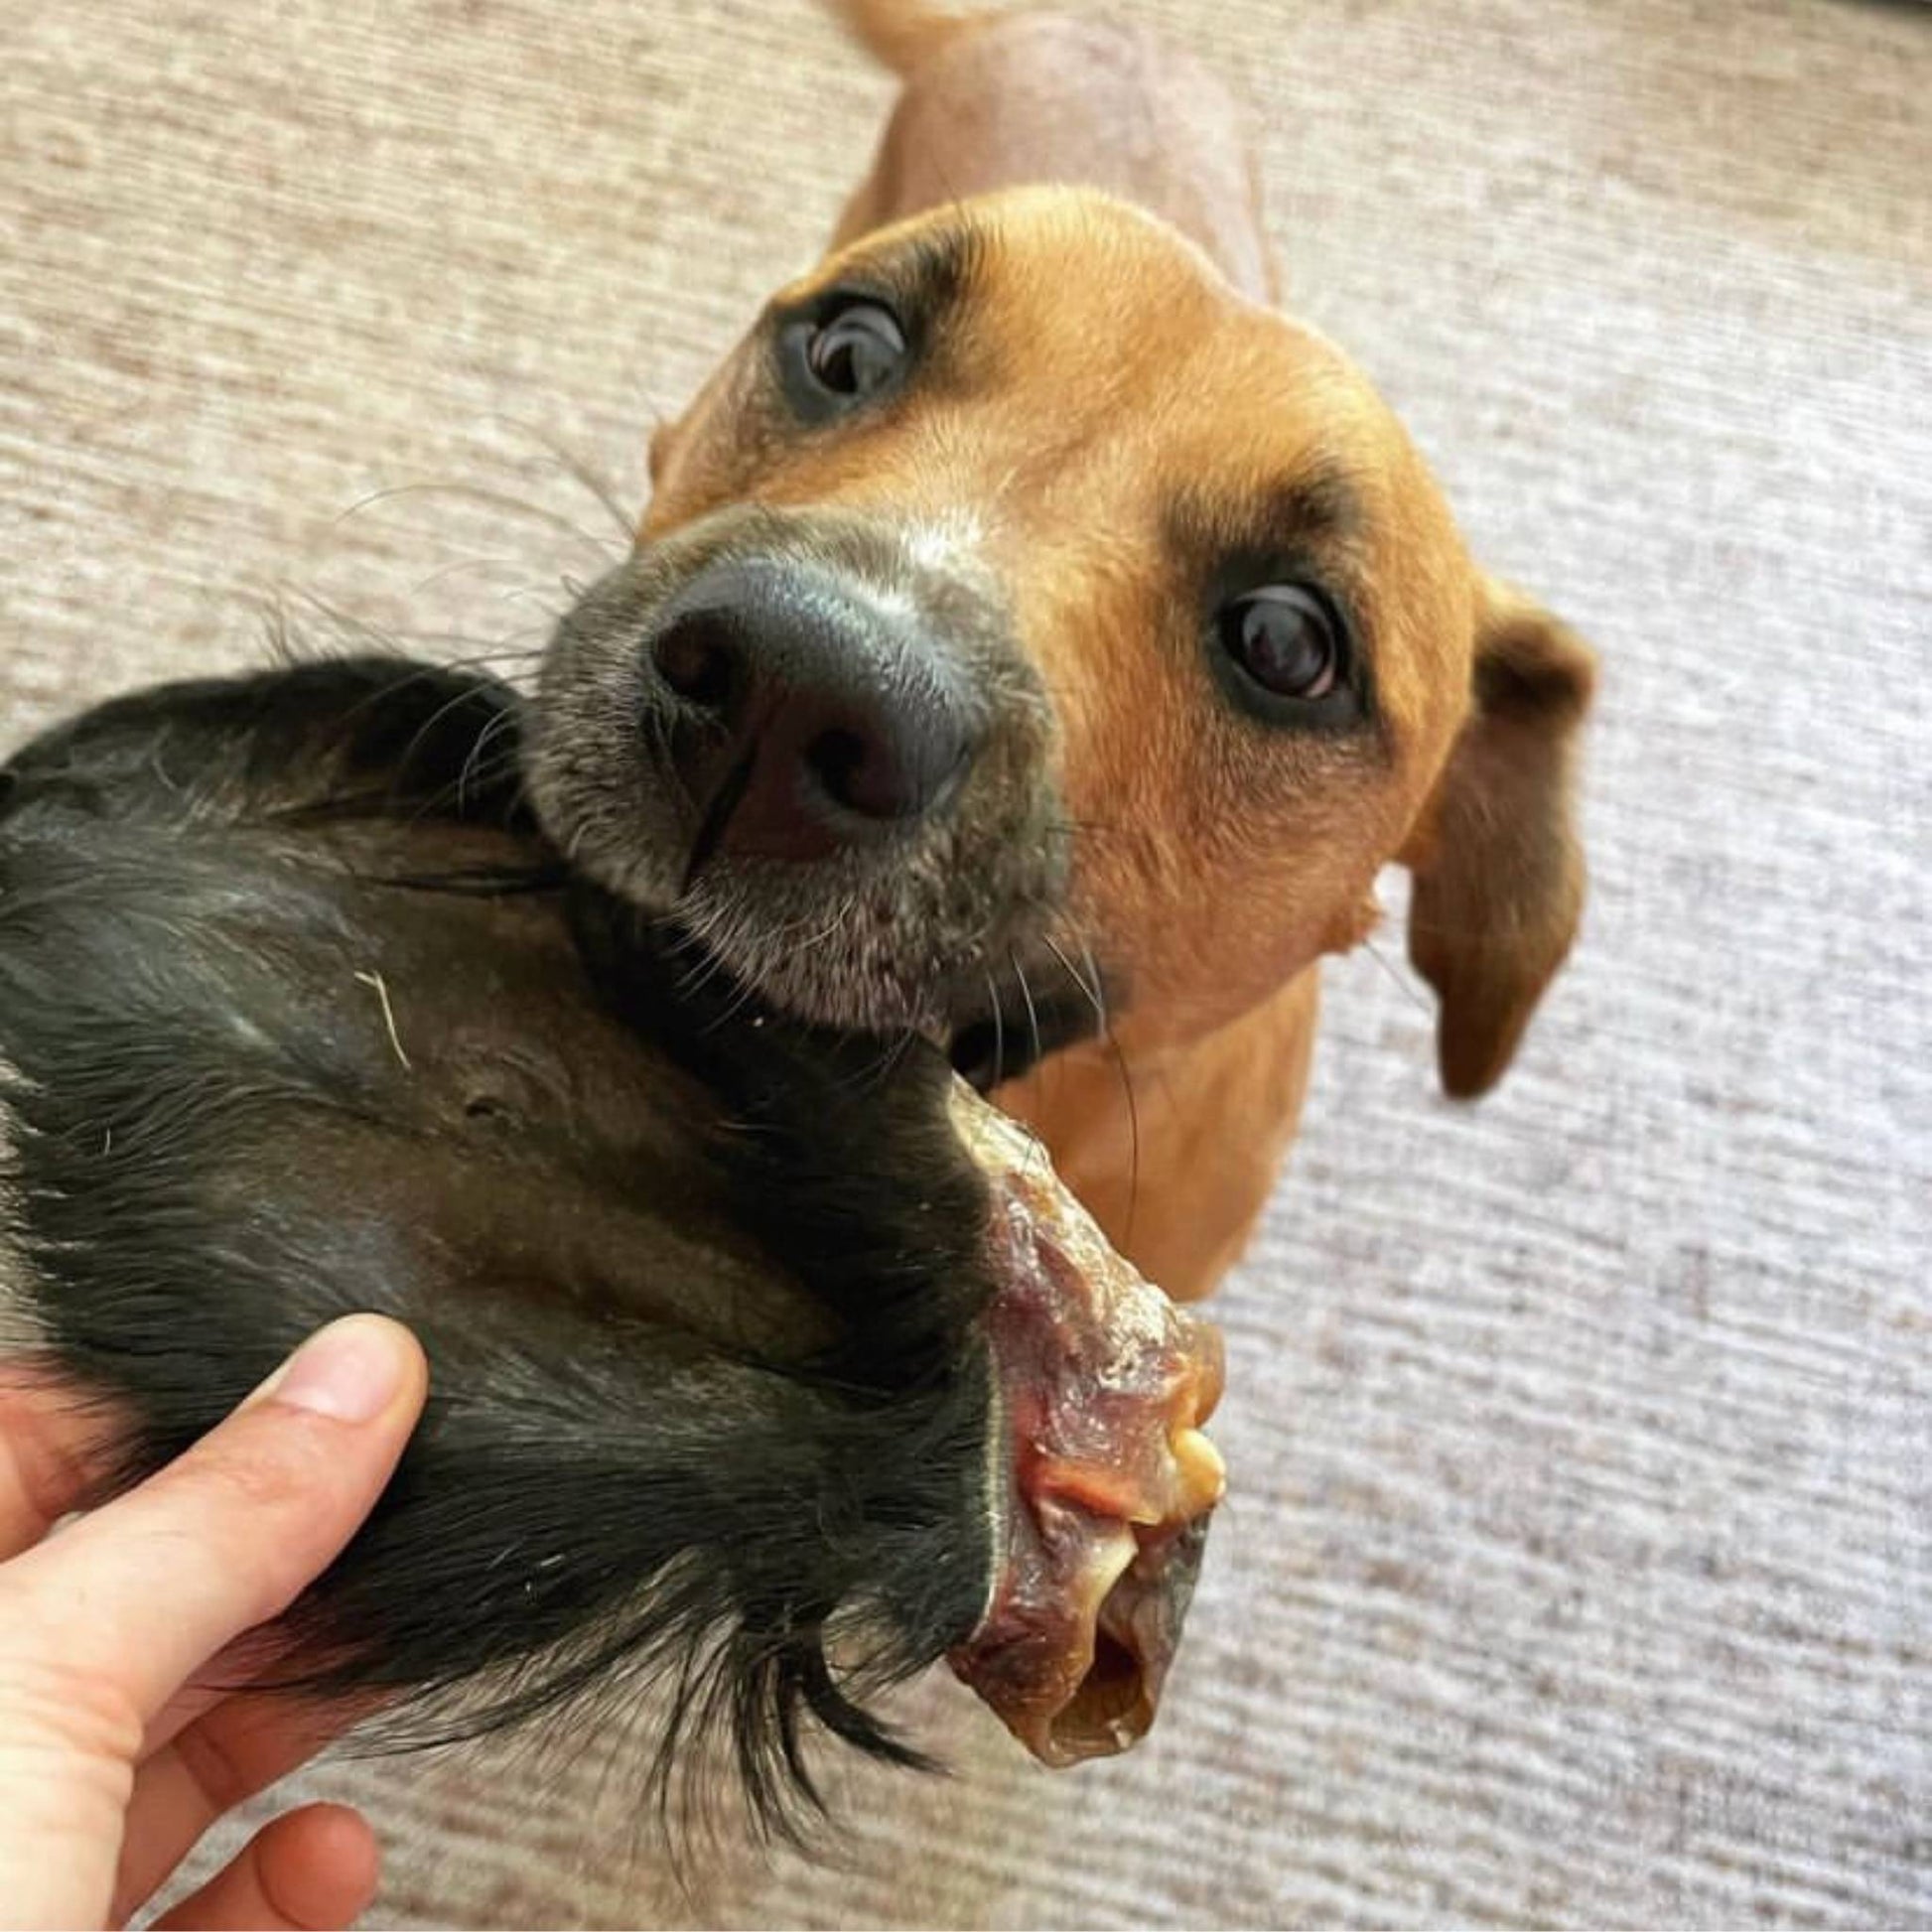 Buffalo ear with fur in dogs mouth